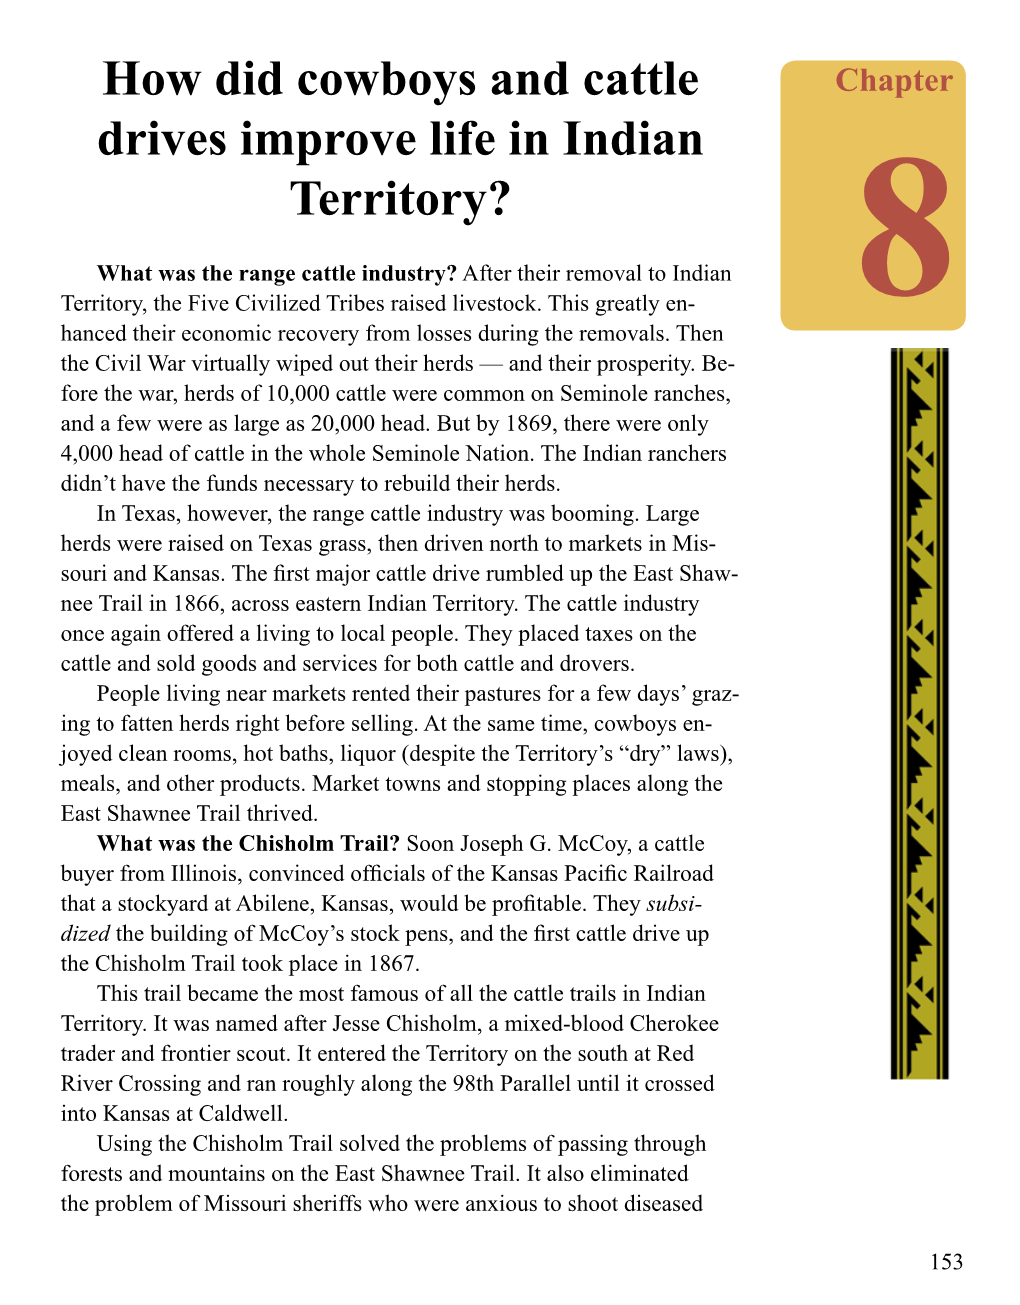 How Did Cowboys and Cattle Drives Improve Life in Indian Territory?